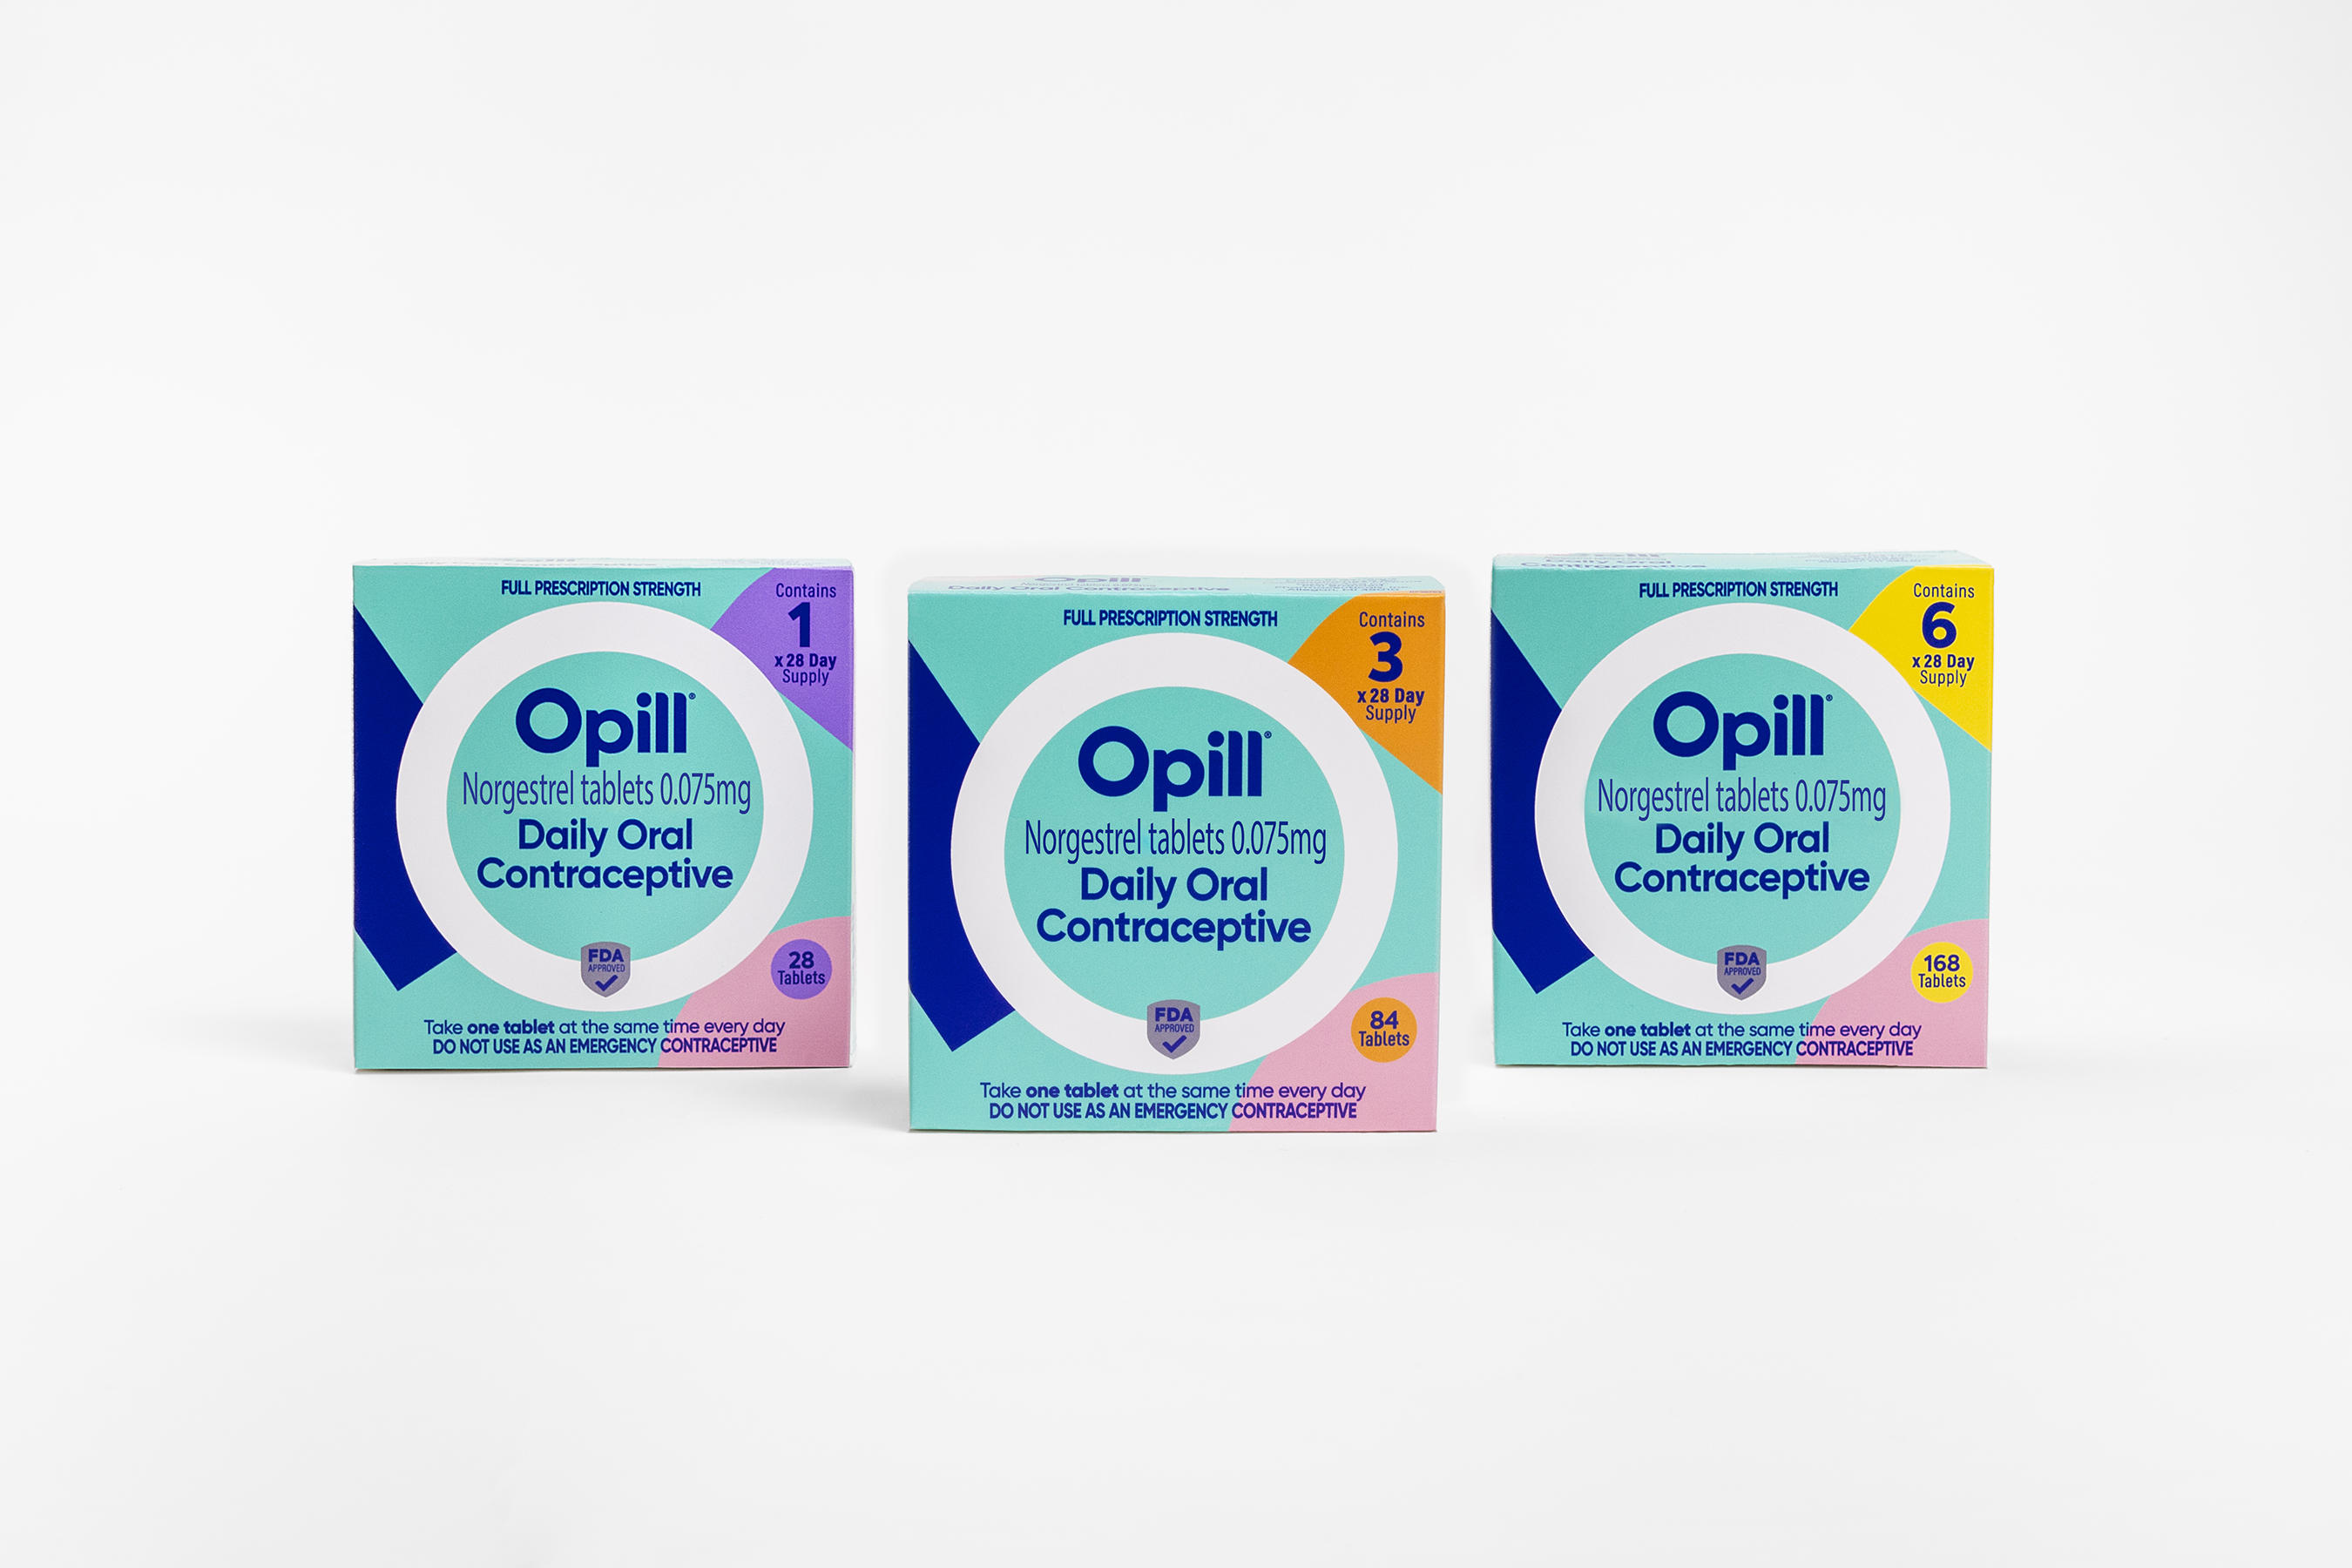 Perrigo Commences Shipments of Opill® to Retailers Nationwide, Empowering Millions to Enter a New Era of Reproductive Health Access in the United States